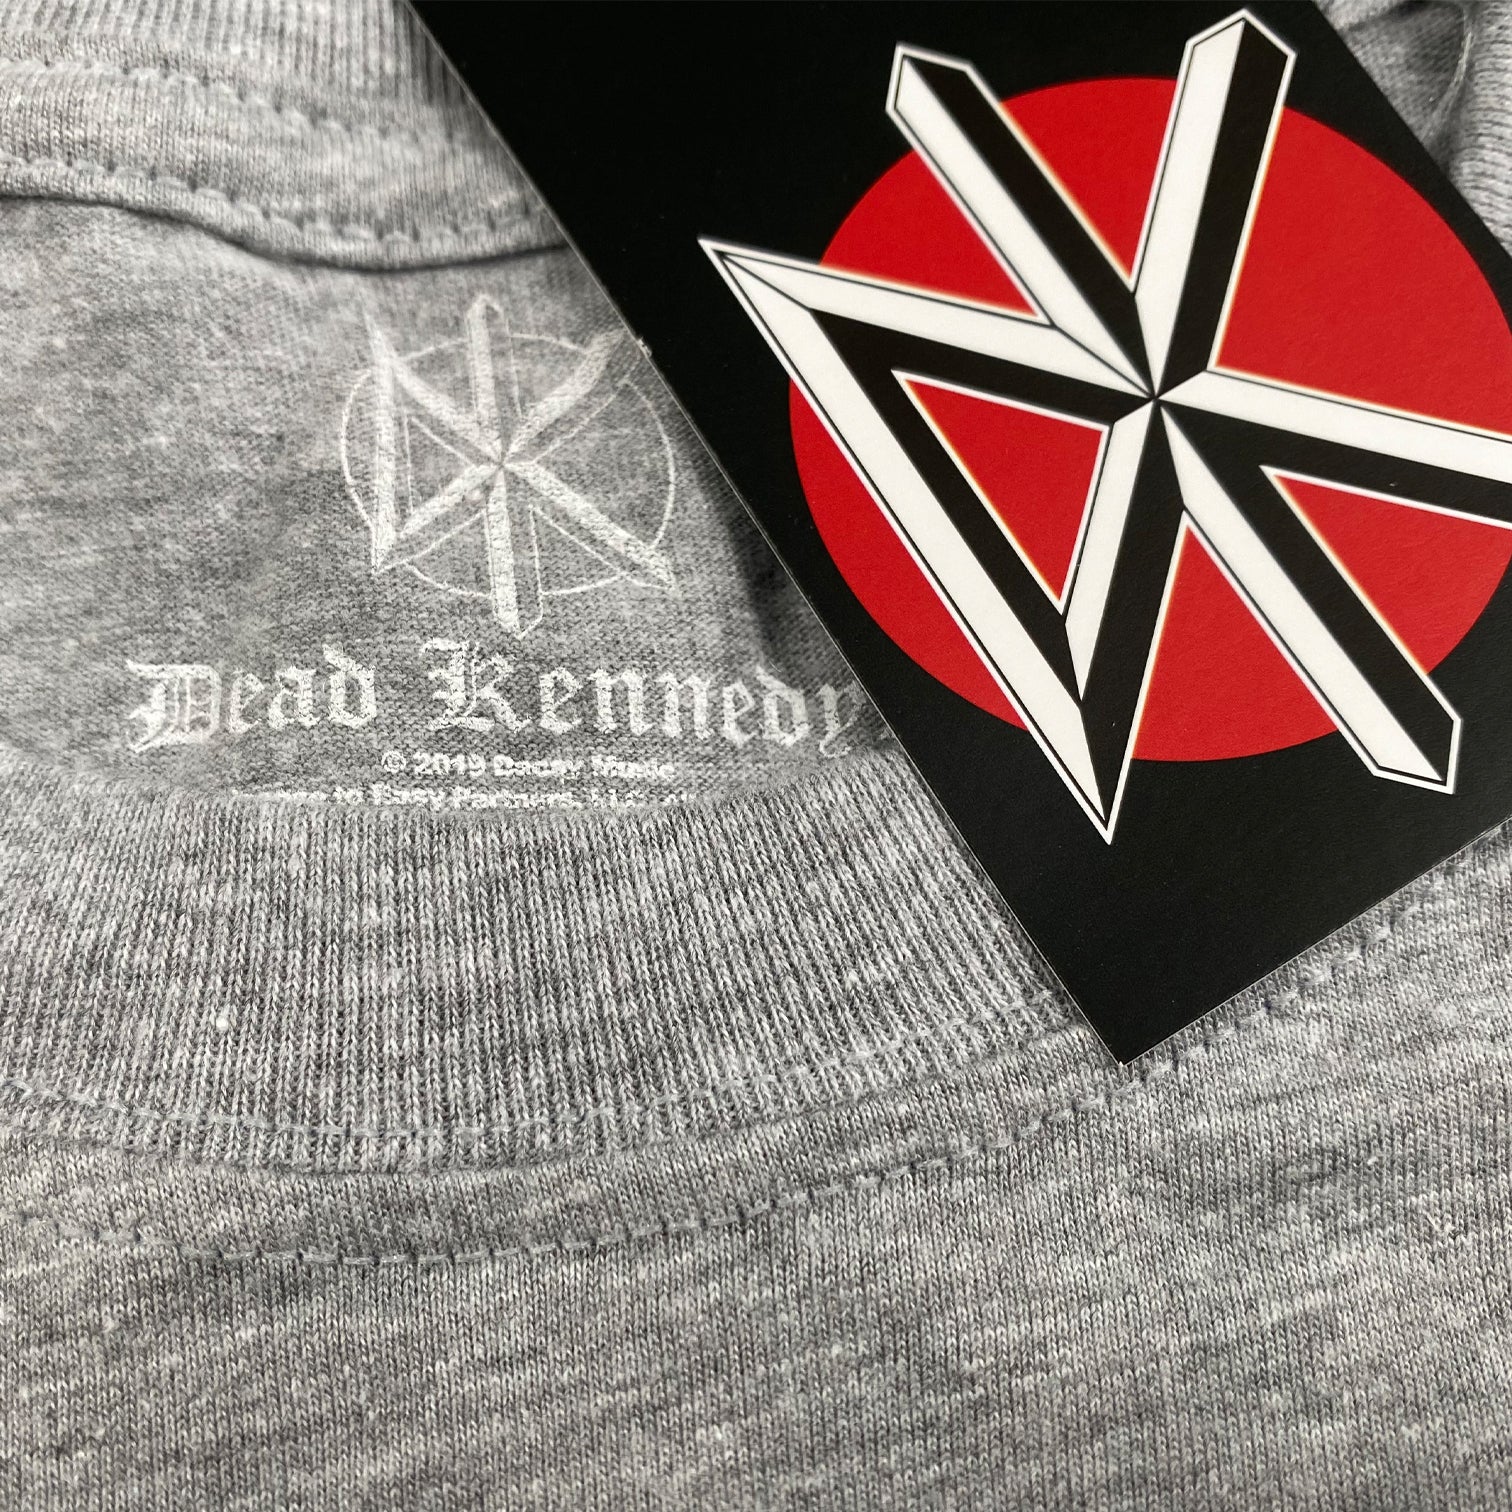 Dead Kennedys - Holiday In Cambodia T Shirt